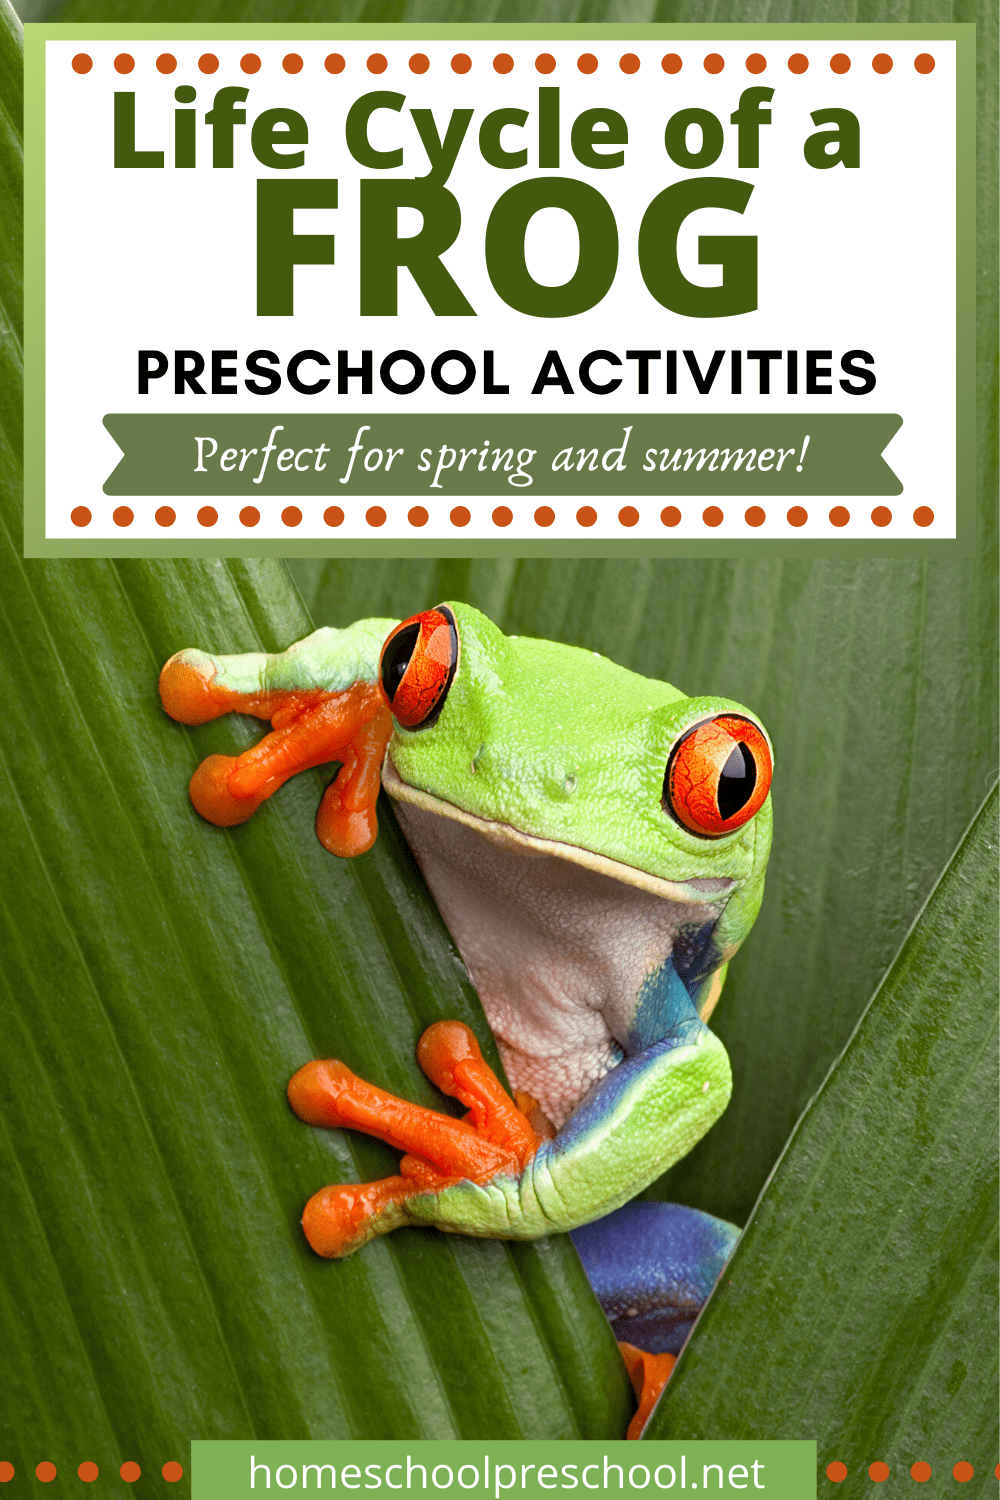 frog-life-cycle-acts-1 Frog Books for Toddlers